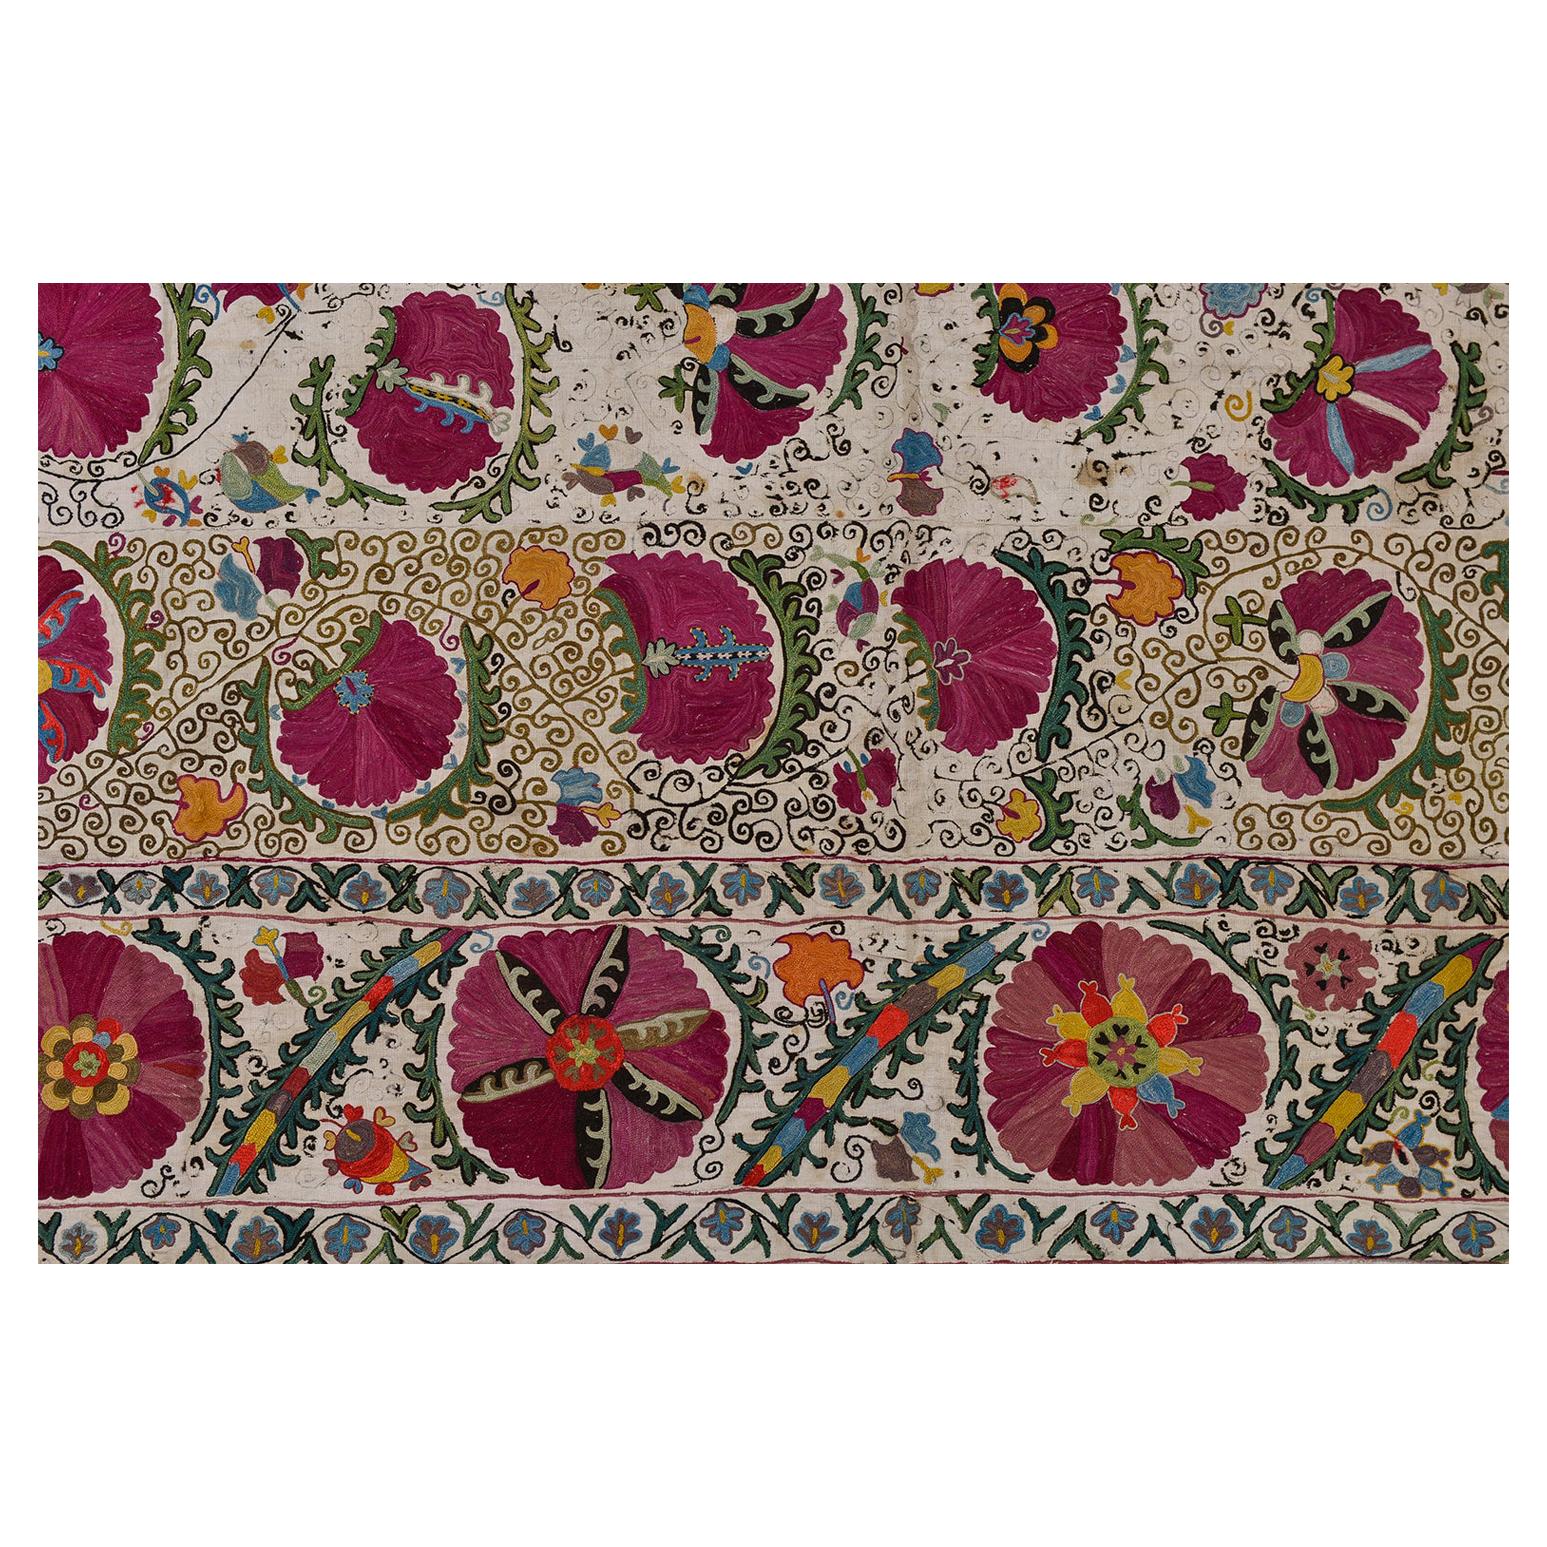  Rare Silk Antique Suzani from Private Collection suitable for Wall, Bed, Table For Sale